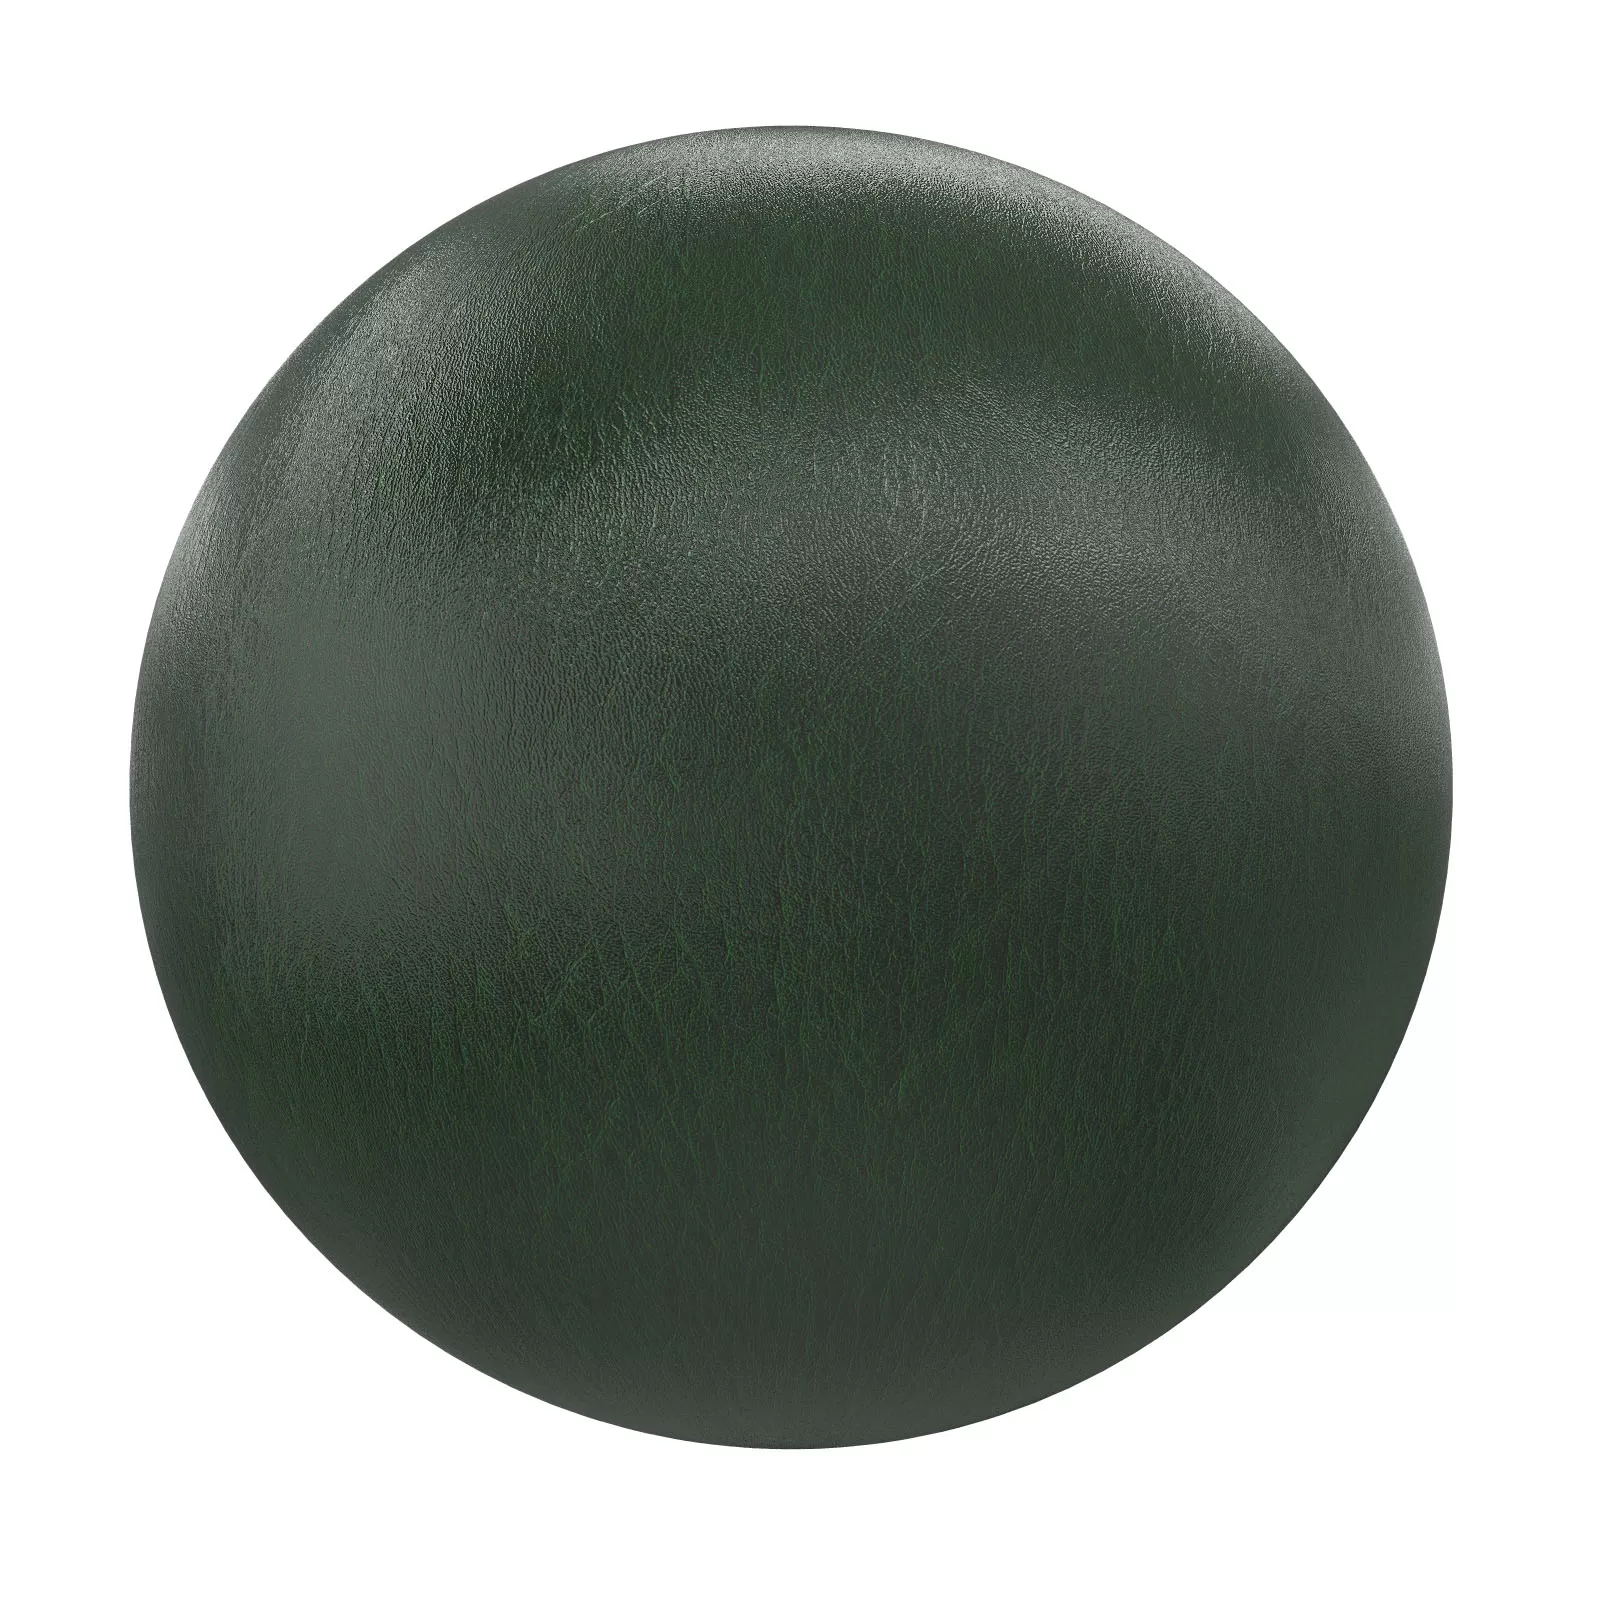 PBR CGAXIS TEXTURES – LEATHER – Green Leather 4